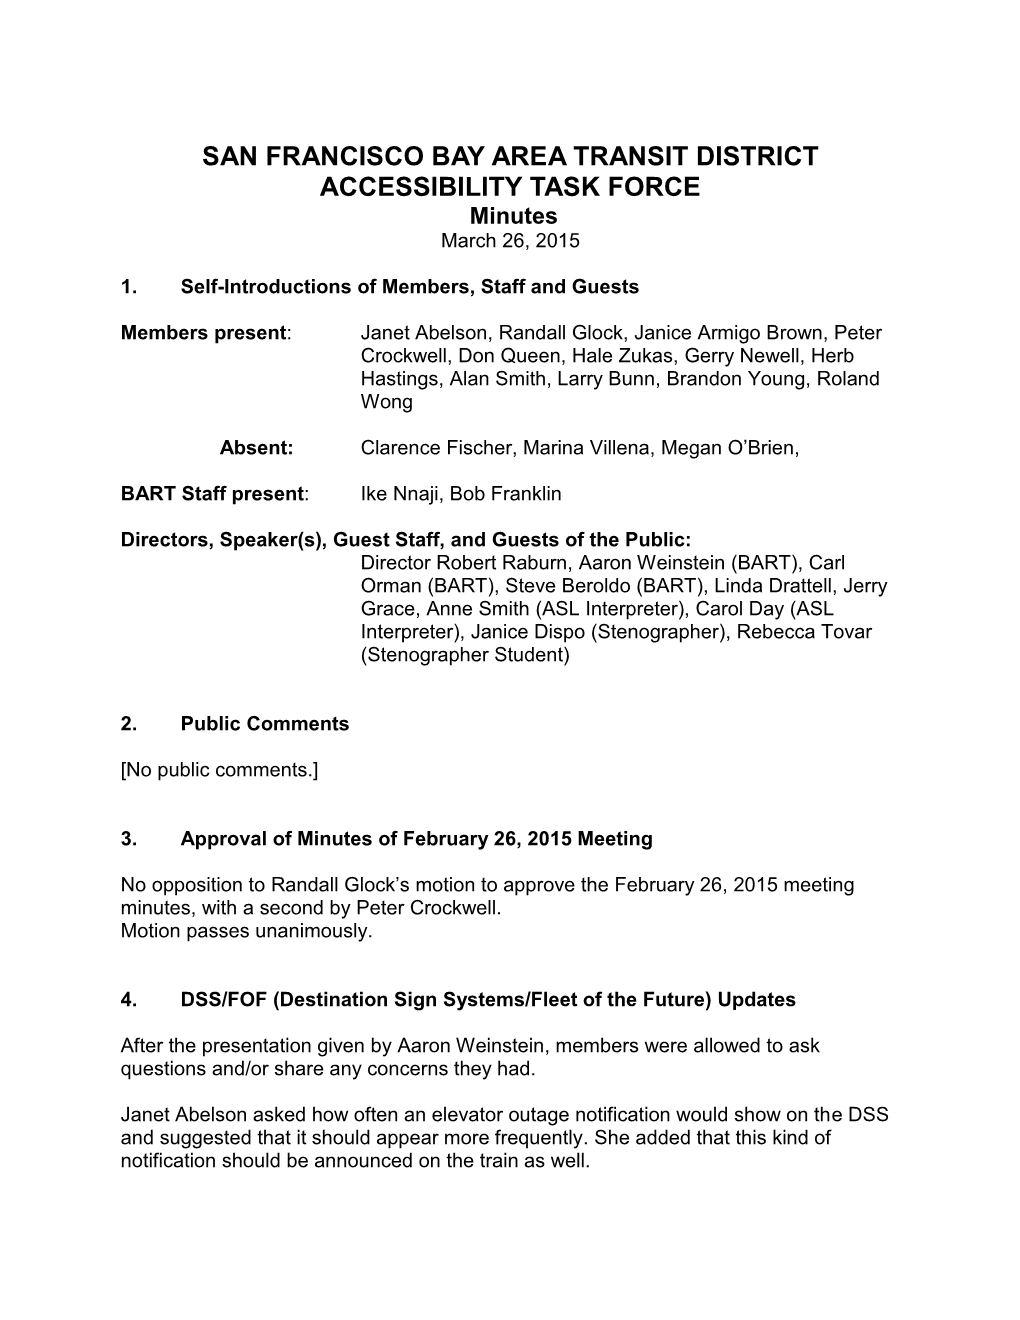 SAN FRANCISCO BAY AREA TRANSIT DISTRICT ACCESSIBILITY TASK FORCE Minutes March 26, 2015